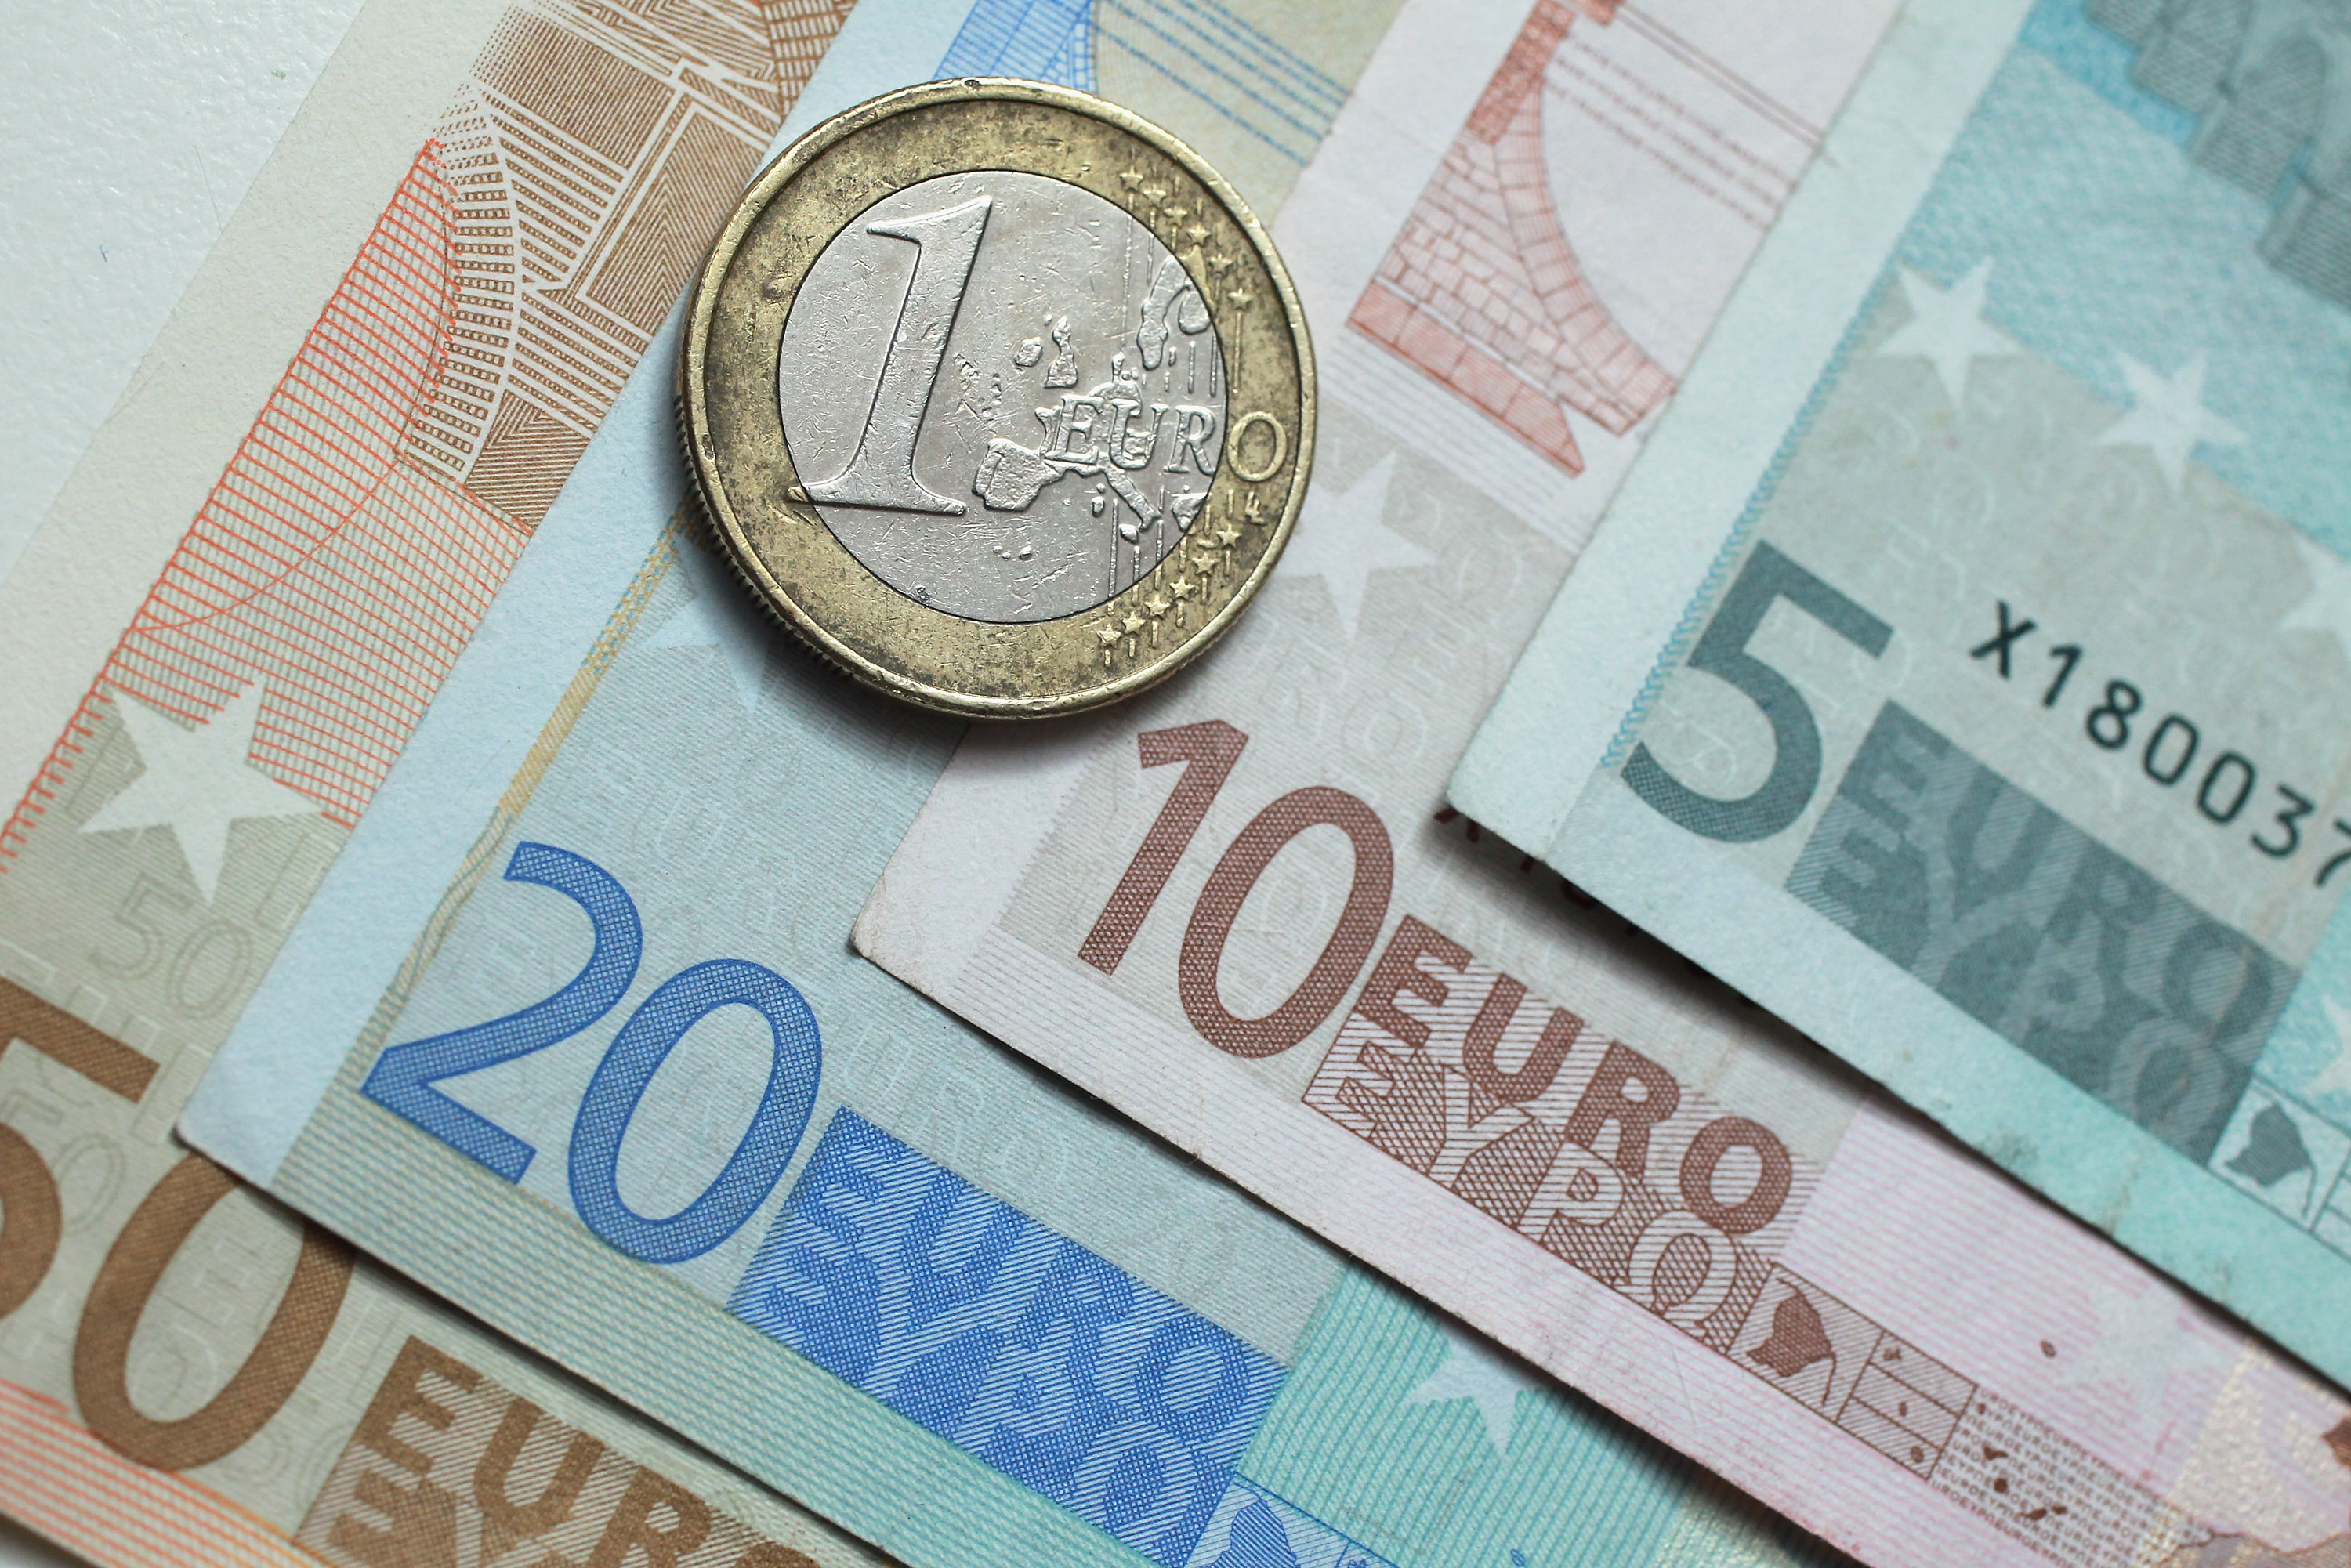 BERLIN, GERMANY - JUNE 21: In this photo illustration a one Euro coin lies on Euro currency bills on June 21, 2011 in Berlin, Germany. Eurozone finance ministers are currently seeking to find a solution to Greece's pressing debt problems, including the prospect of the country's inability to meet its financial obligations unless it gets a fresh, multi-billion Euro loan by July 1. Greece's increasing tilt towards bankruptcy is rattling worldwide financial markets, and leading economists warn that bankruptcy would endanger the stability of the Euro and have dire global consequences. (Photo Illustration by Sean Gallup/Getty Images)